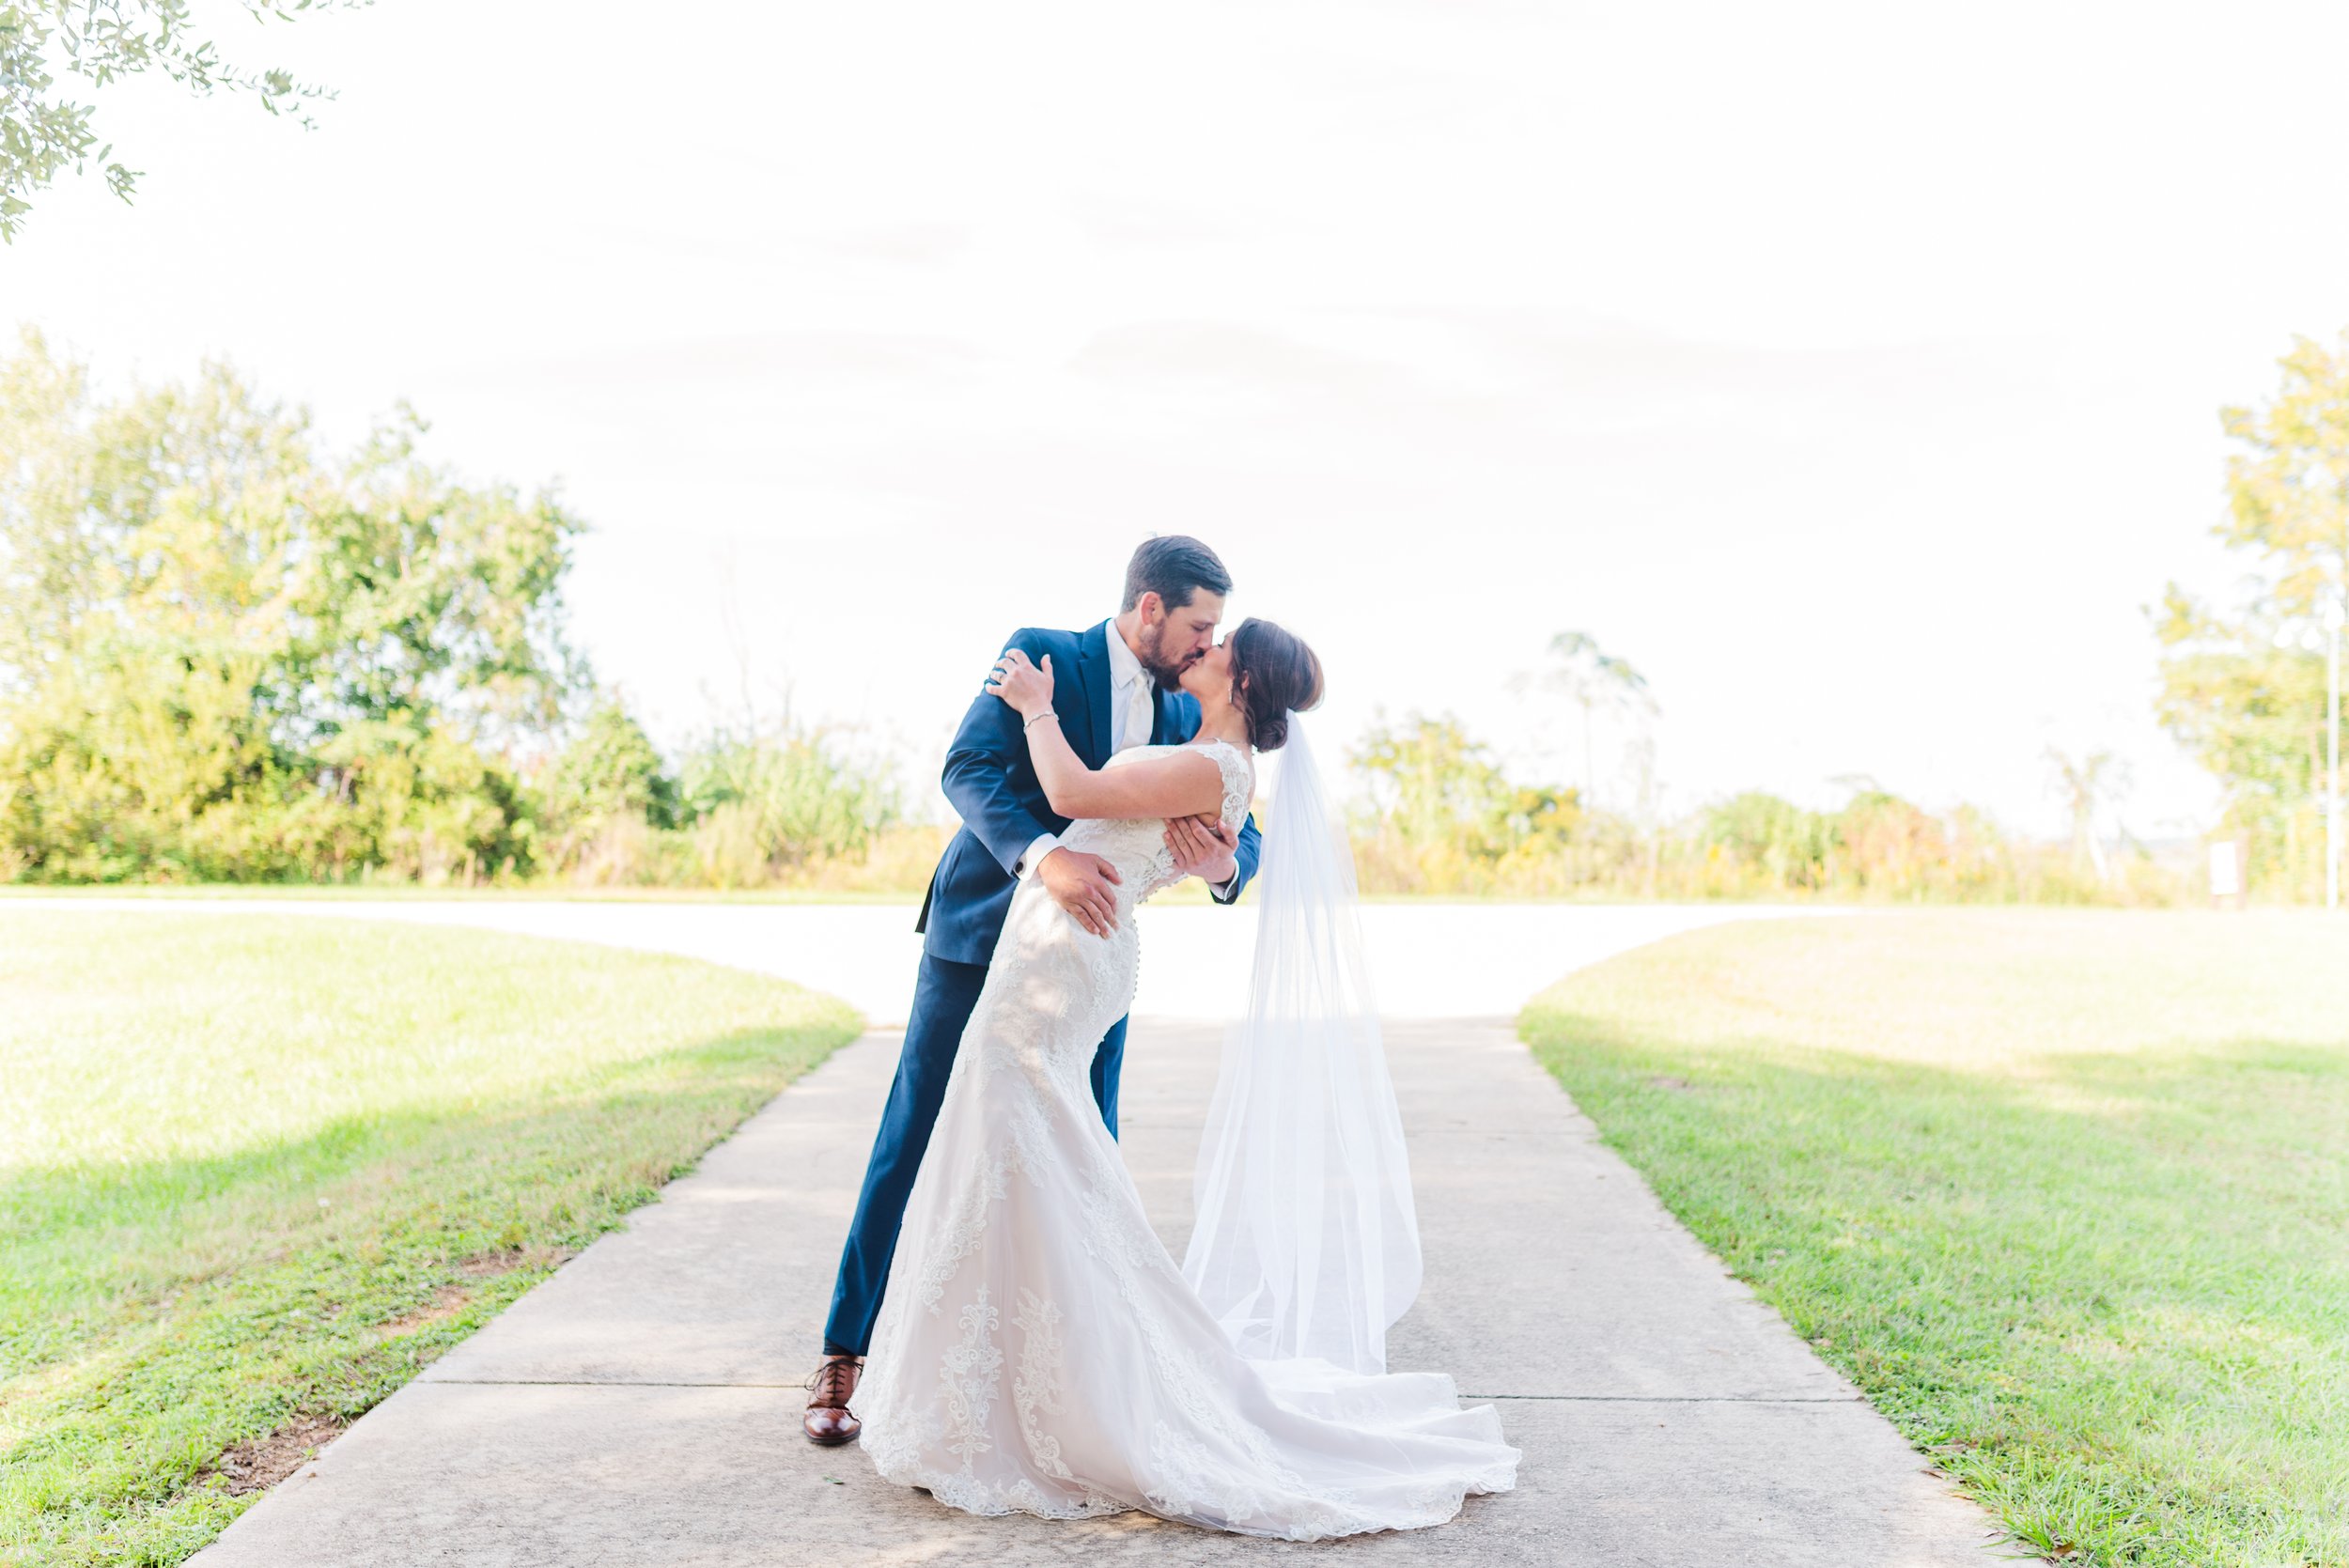 Fall Five Rivers Delta Resource Center in Spanish Fort, Alabama Wedding in October Photographed by Kristen Marcus Photography